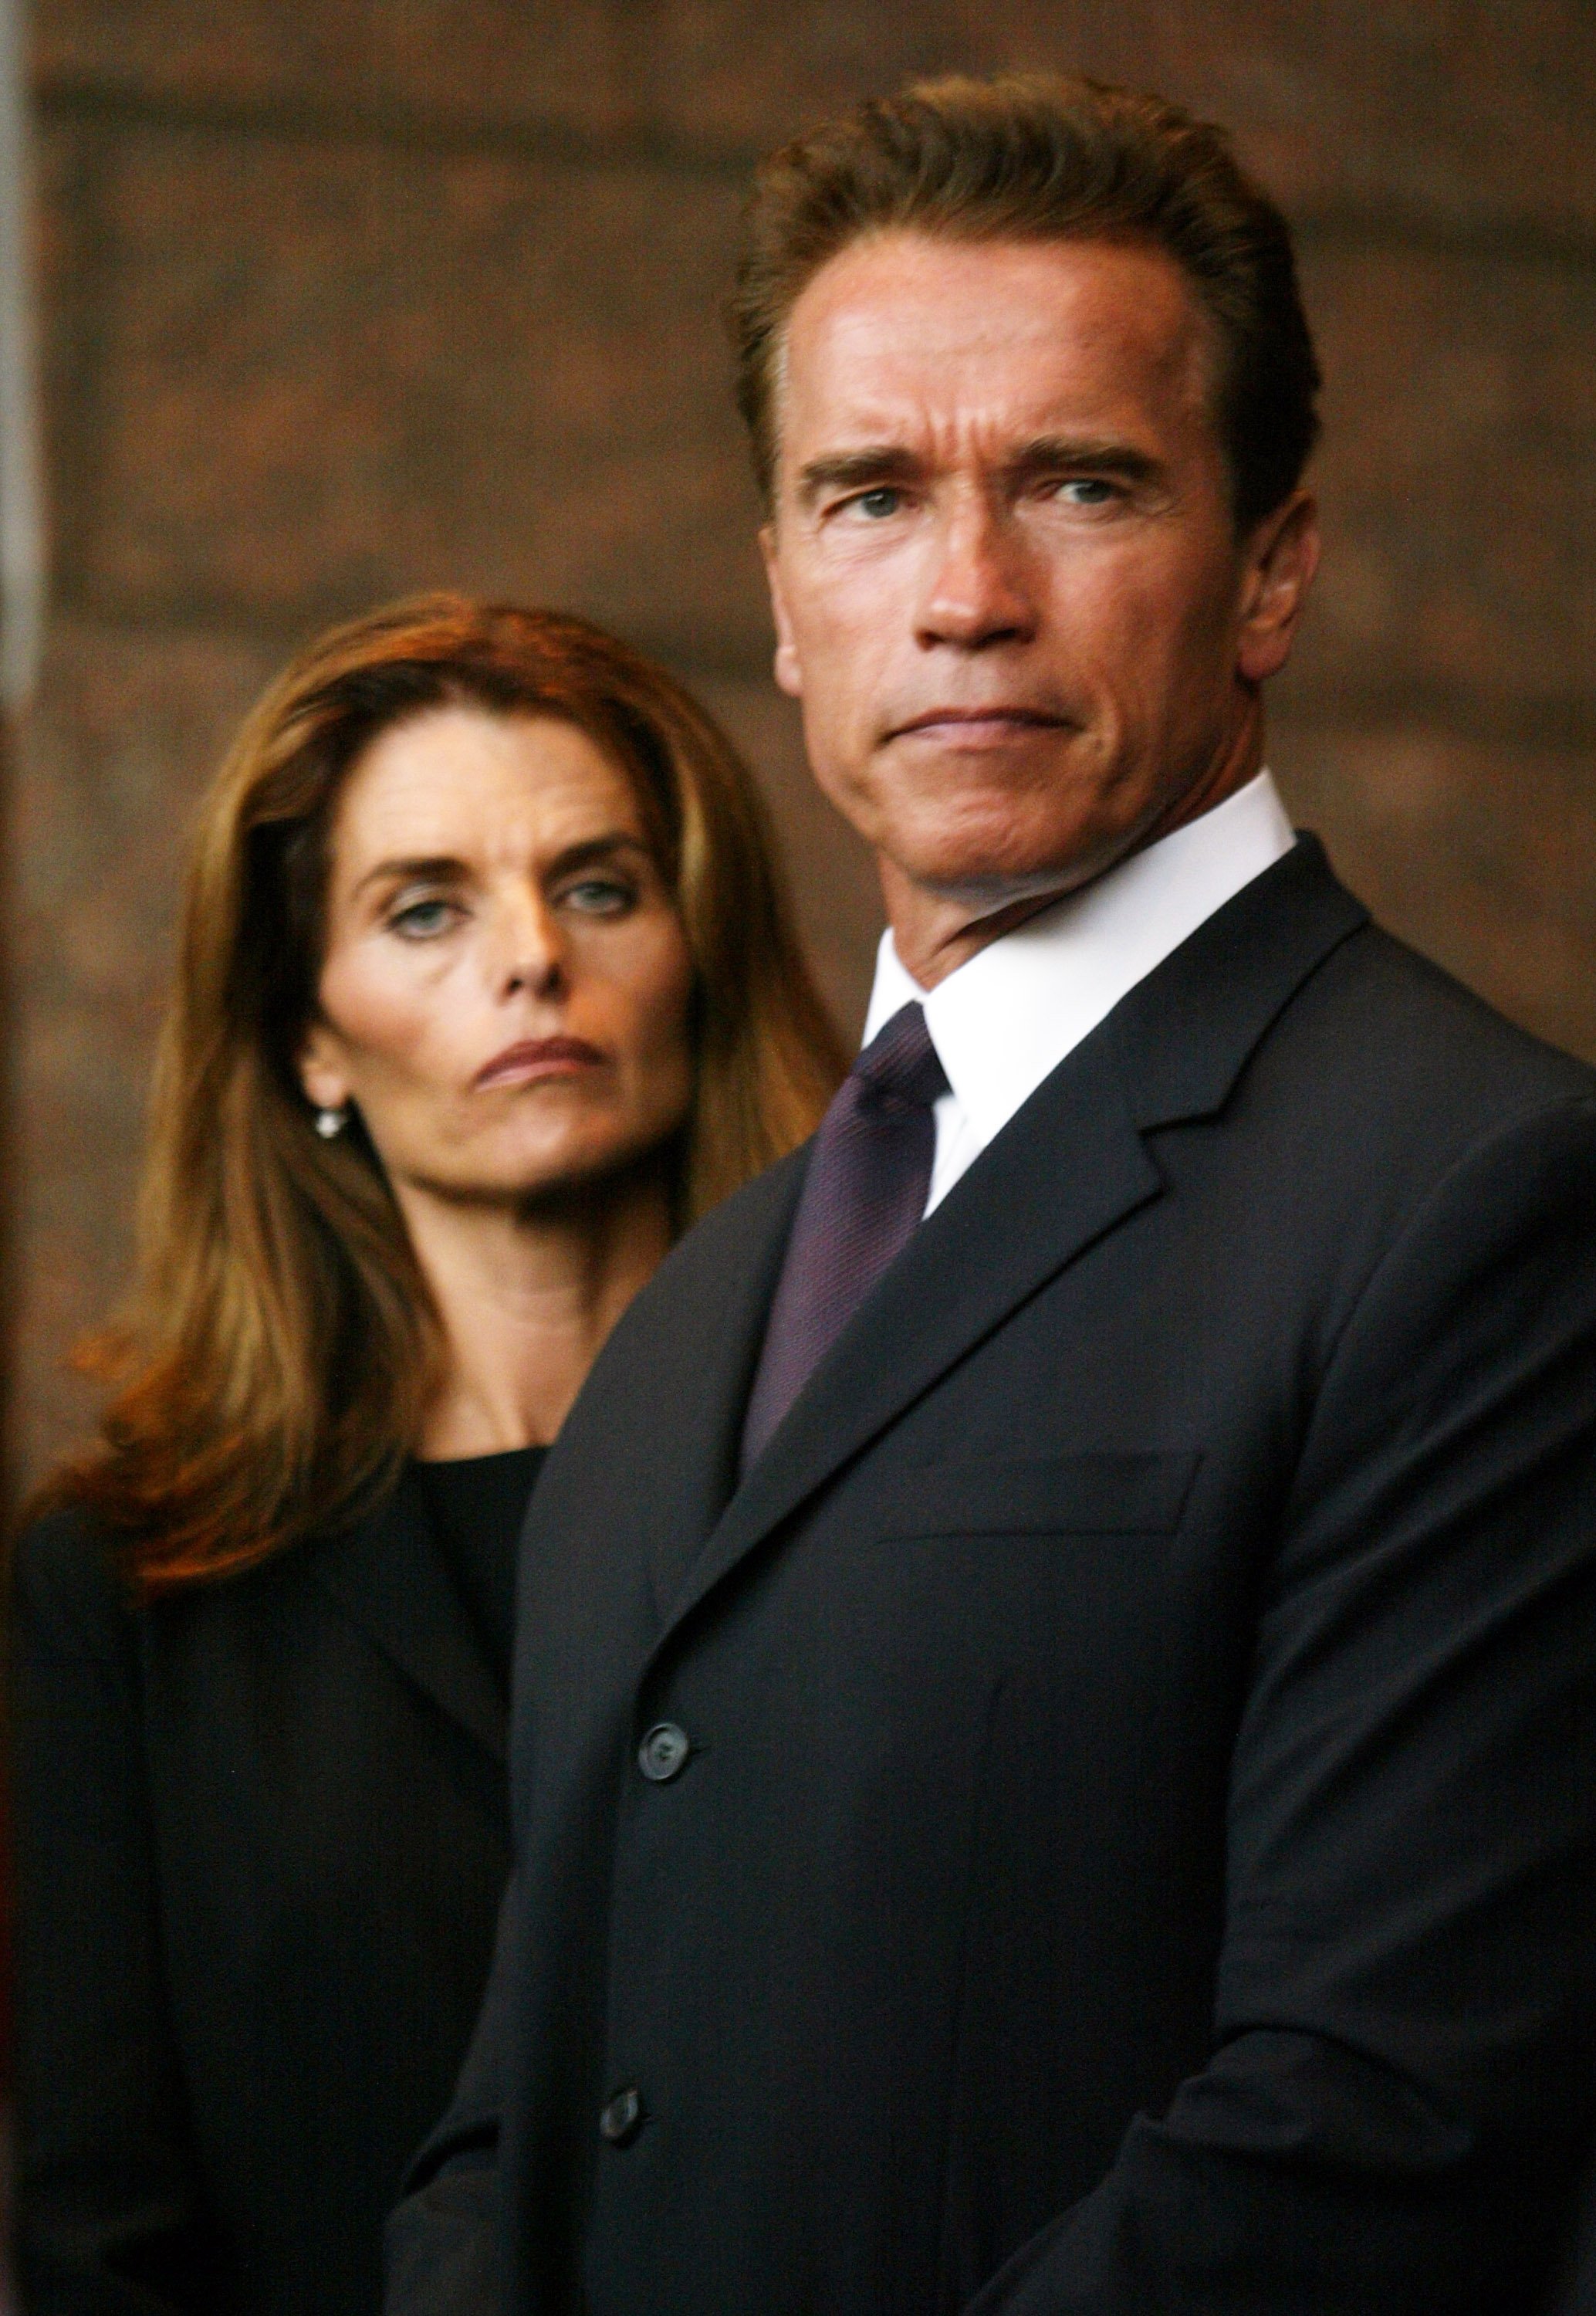 Maria Shriver and Arnold Schwarzenegger share a moment of silence during a ceremony in remembrance of September 11 victims on the two-year anniversary of the attacks, Sept. 11, 2003, at the Museum of Tolerance in Los Angeles | Source: Getty Images